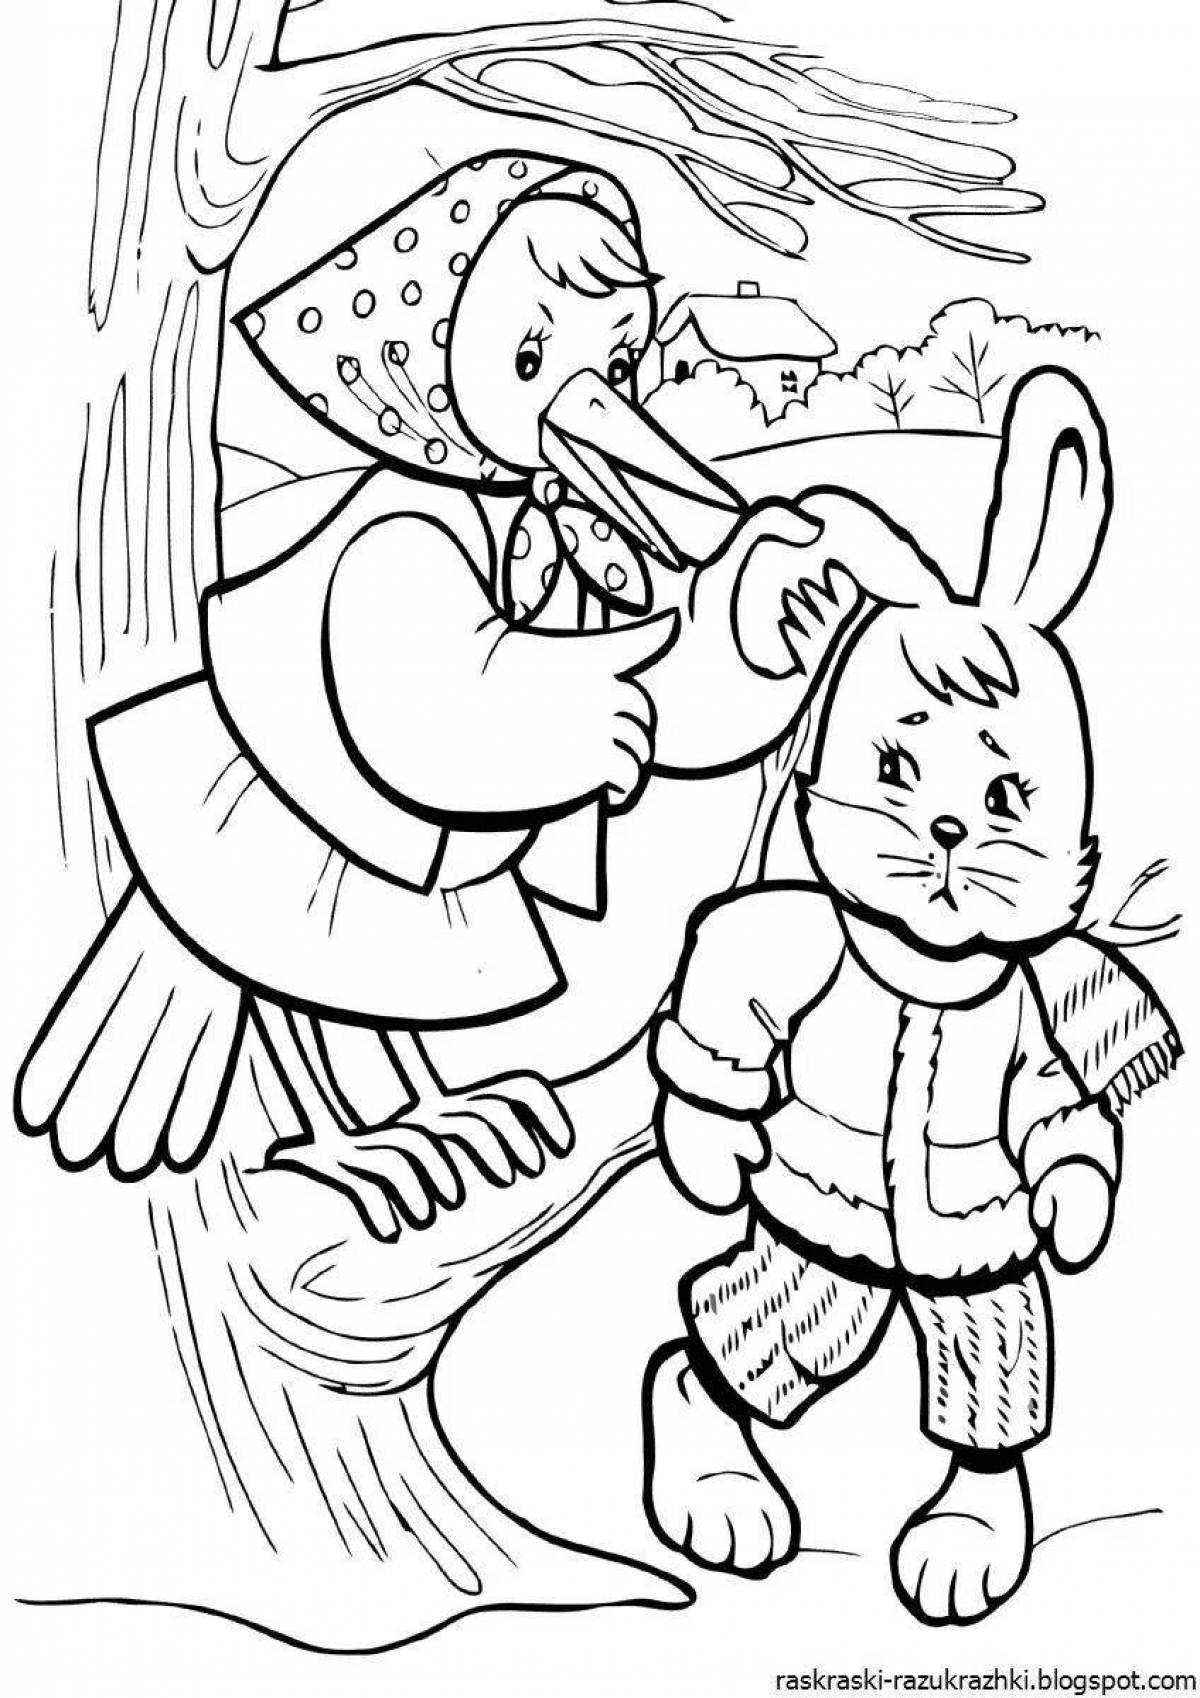 Exquisite coloring book for children's fairy tales